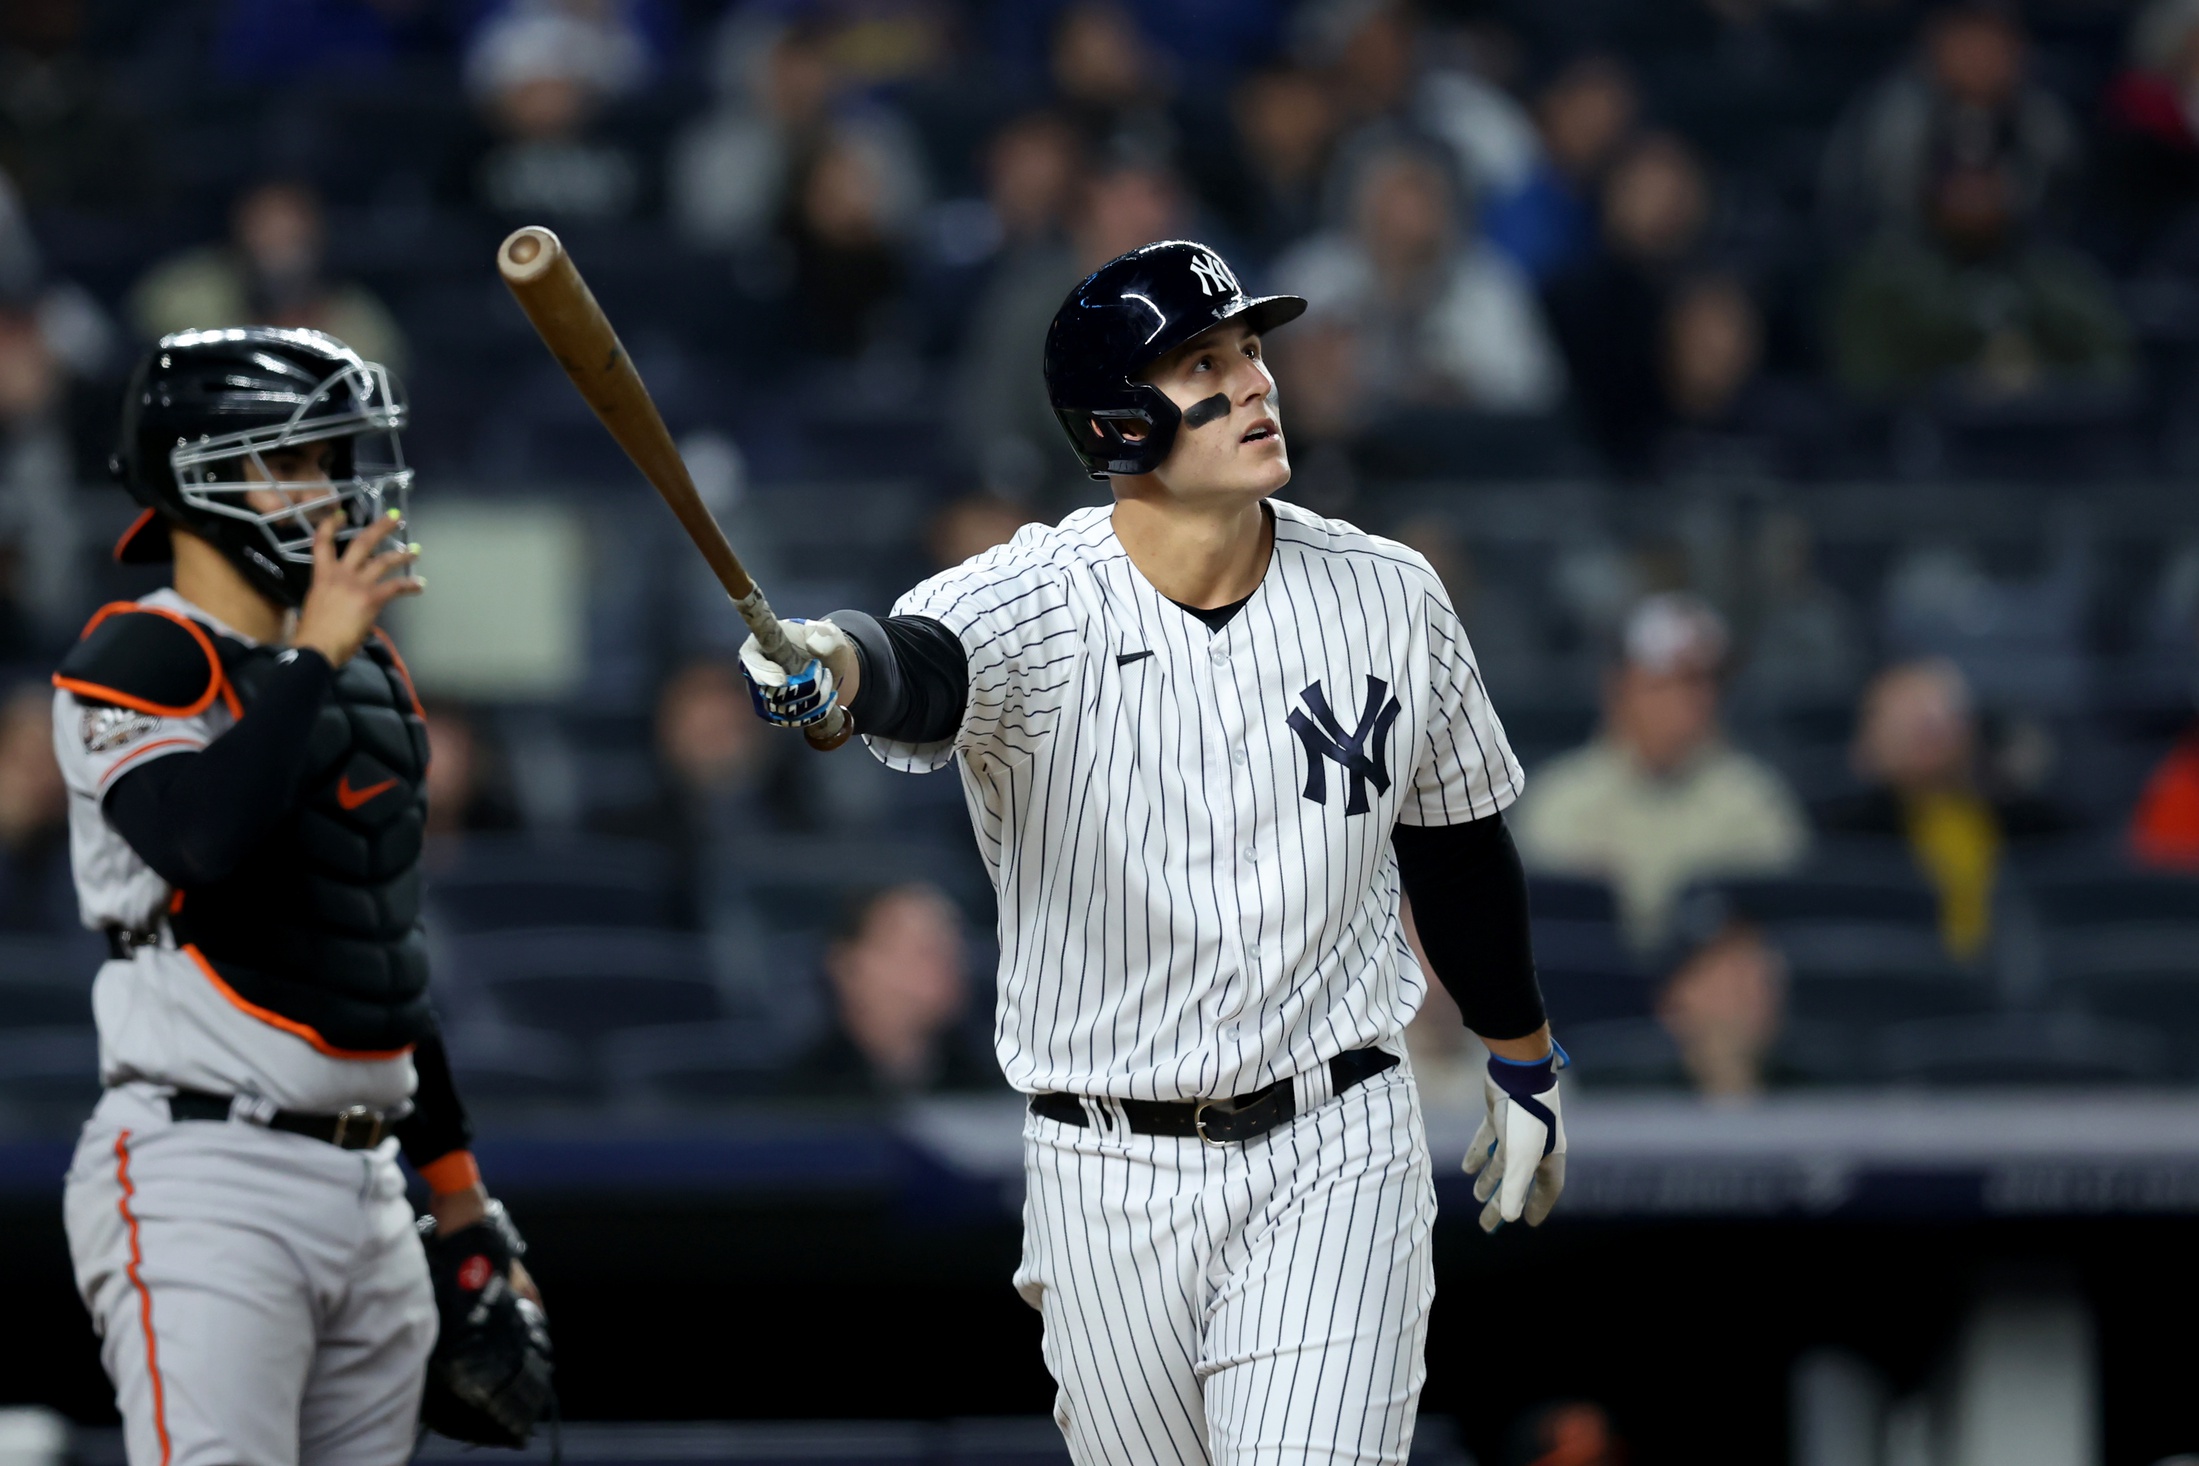 Rizzo HR again for Yanks as Marlins' Mattingly misses game - The